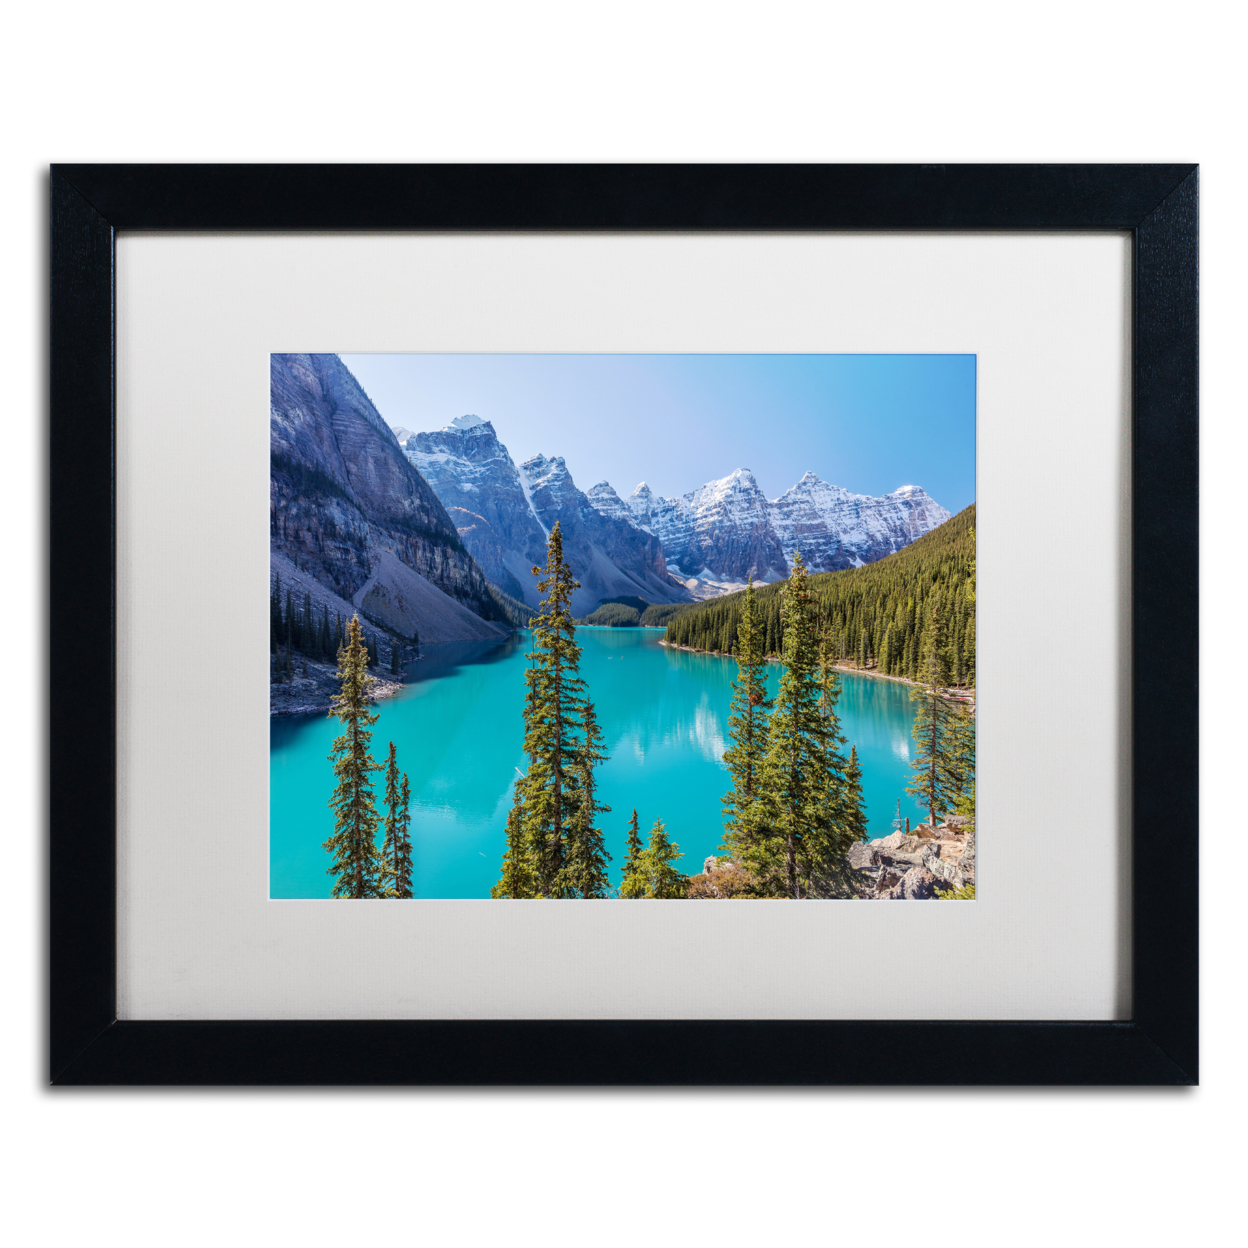 Pierre Leclerc 'Turquoise Moraine Lake' Black Wooden Framed Art 18 X 22 Inches